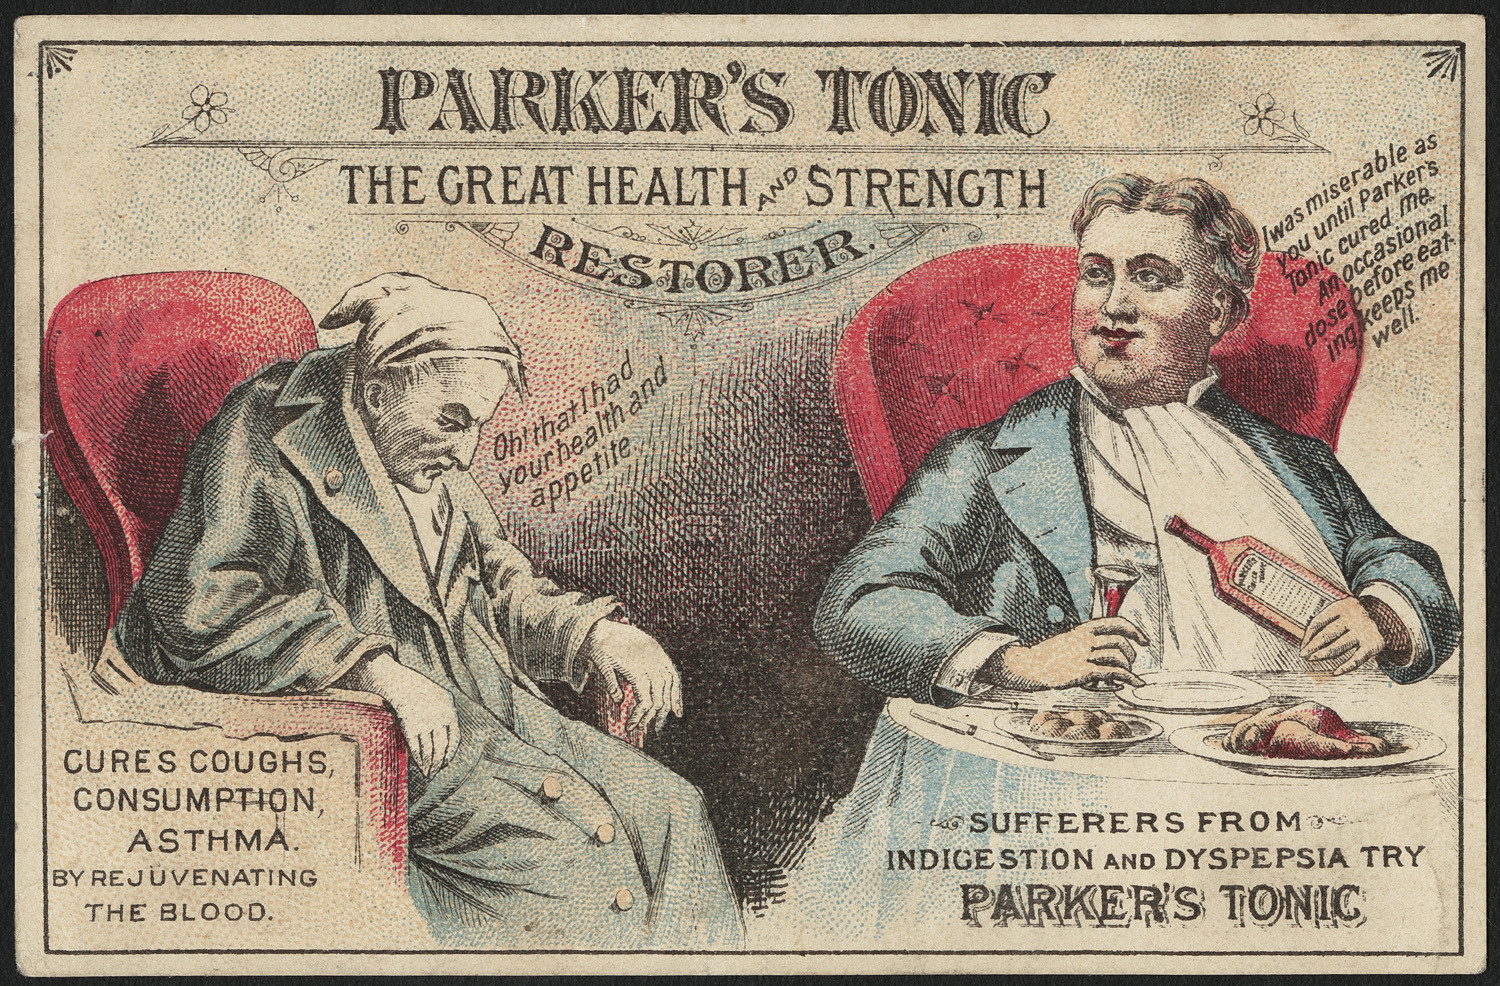 All images courtesy of the Boston Public Library’s collection of medical trade cards